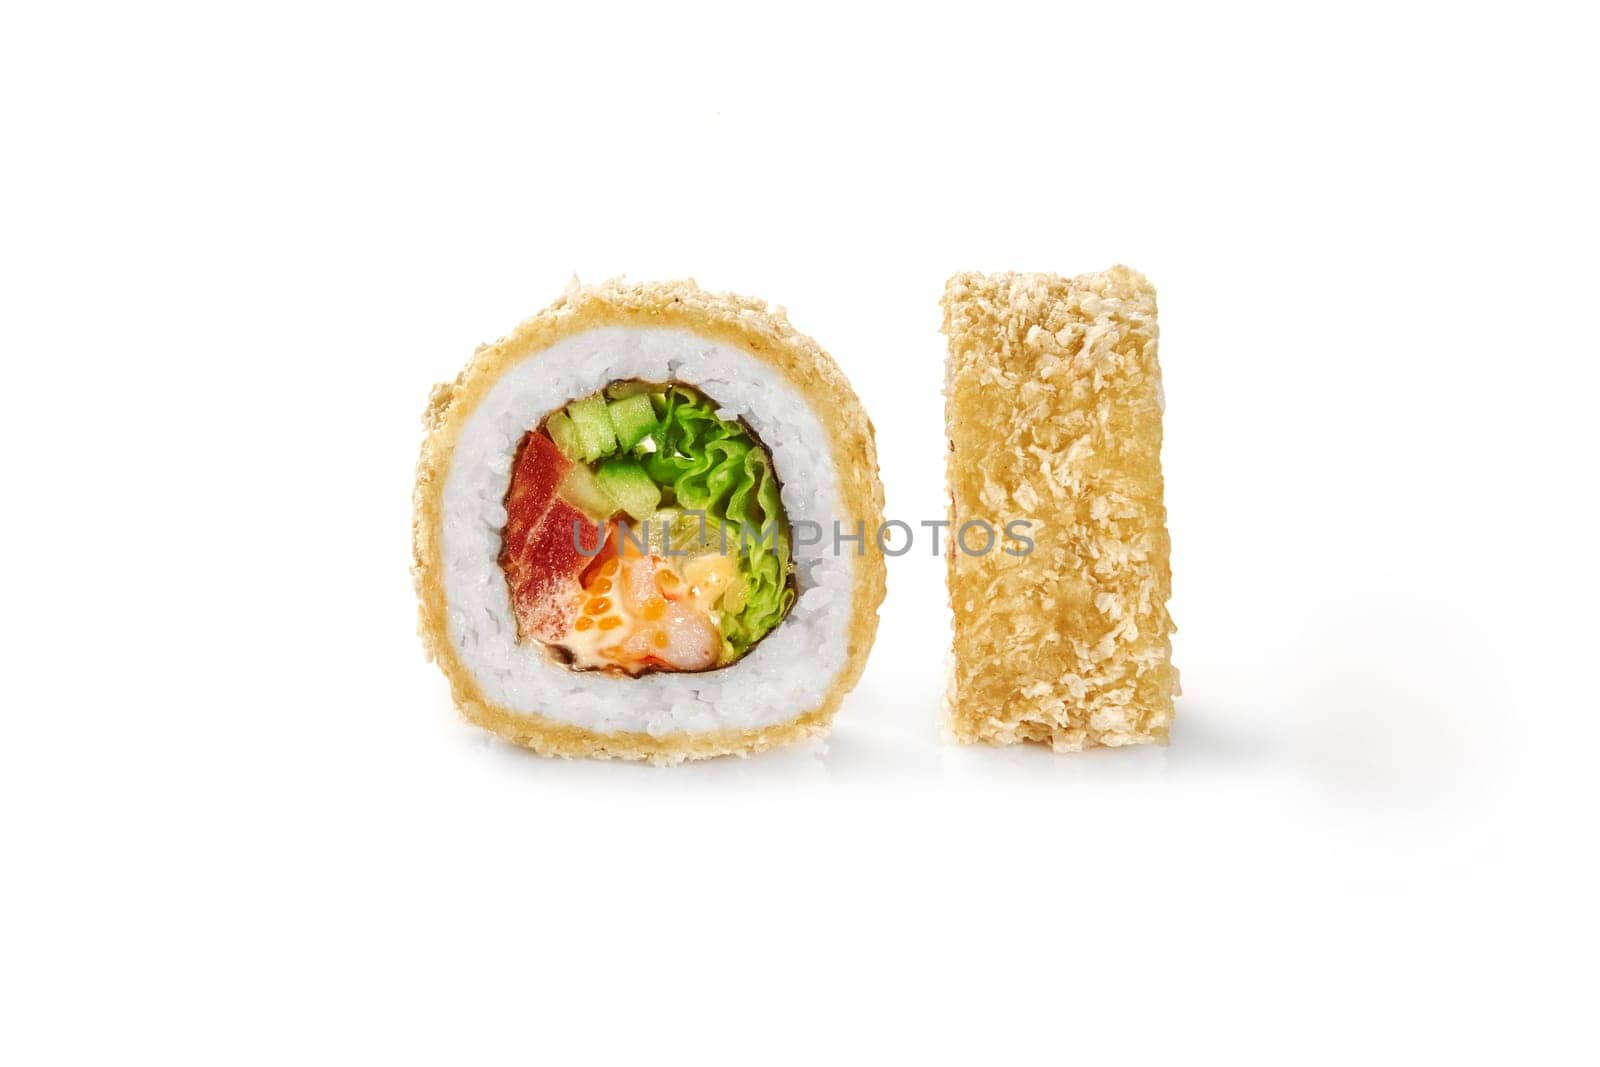 Tempura roll with prawn, tobiko, tomatoes, cucumber and lettuce by nazarovsergey